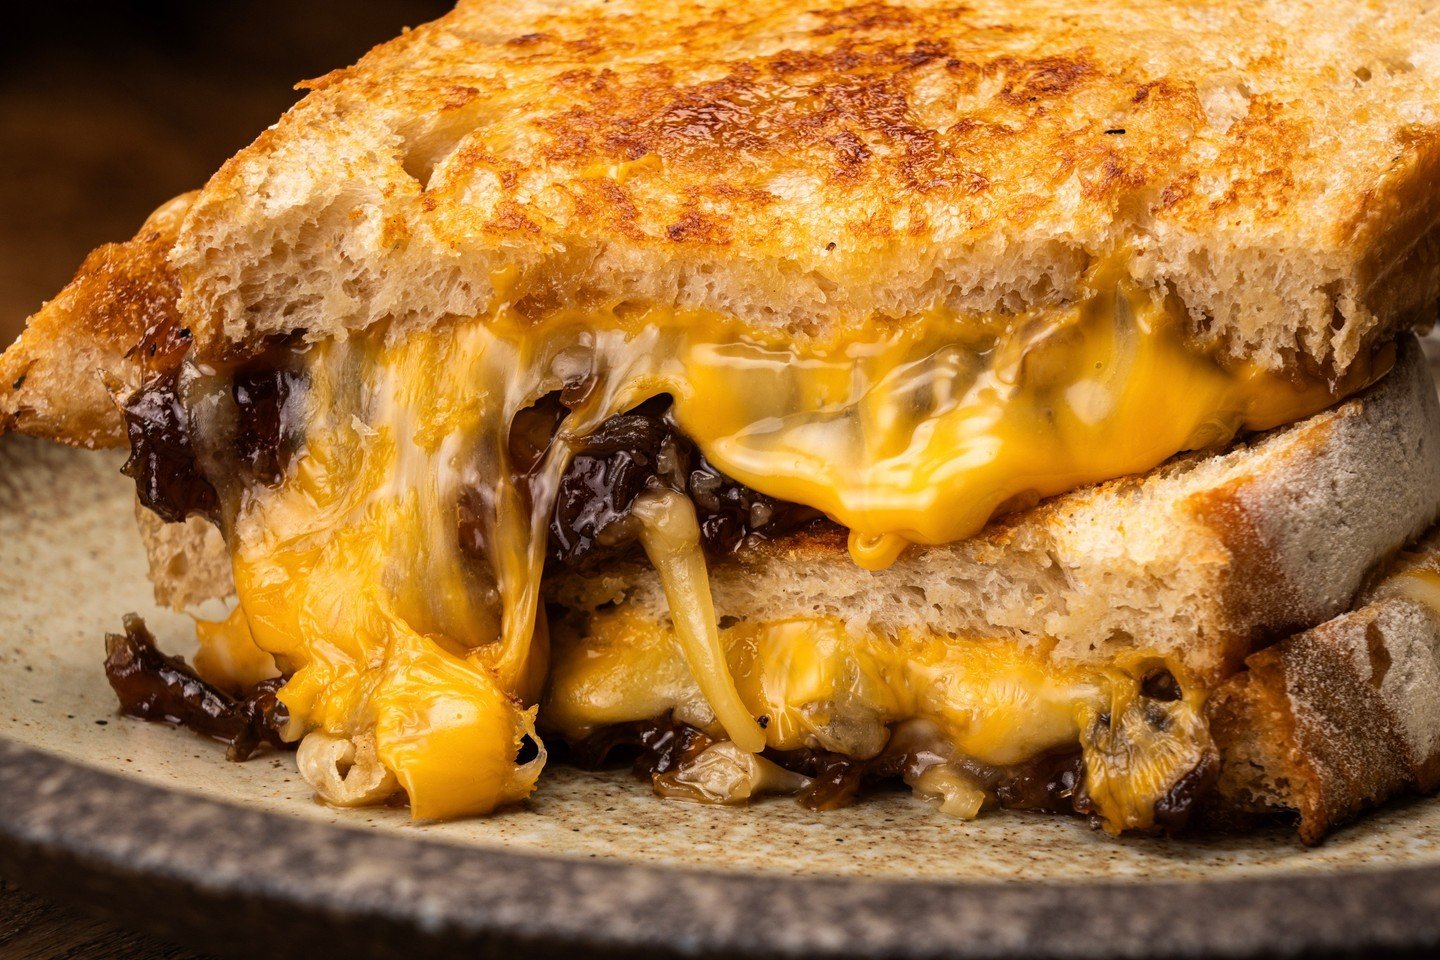 Now this is what we call a real cheese toastie&hellip; 🤤

Visit us at 32 Martin Place today!